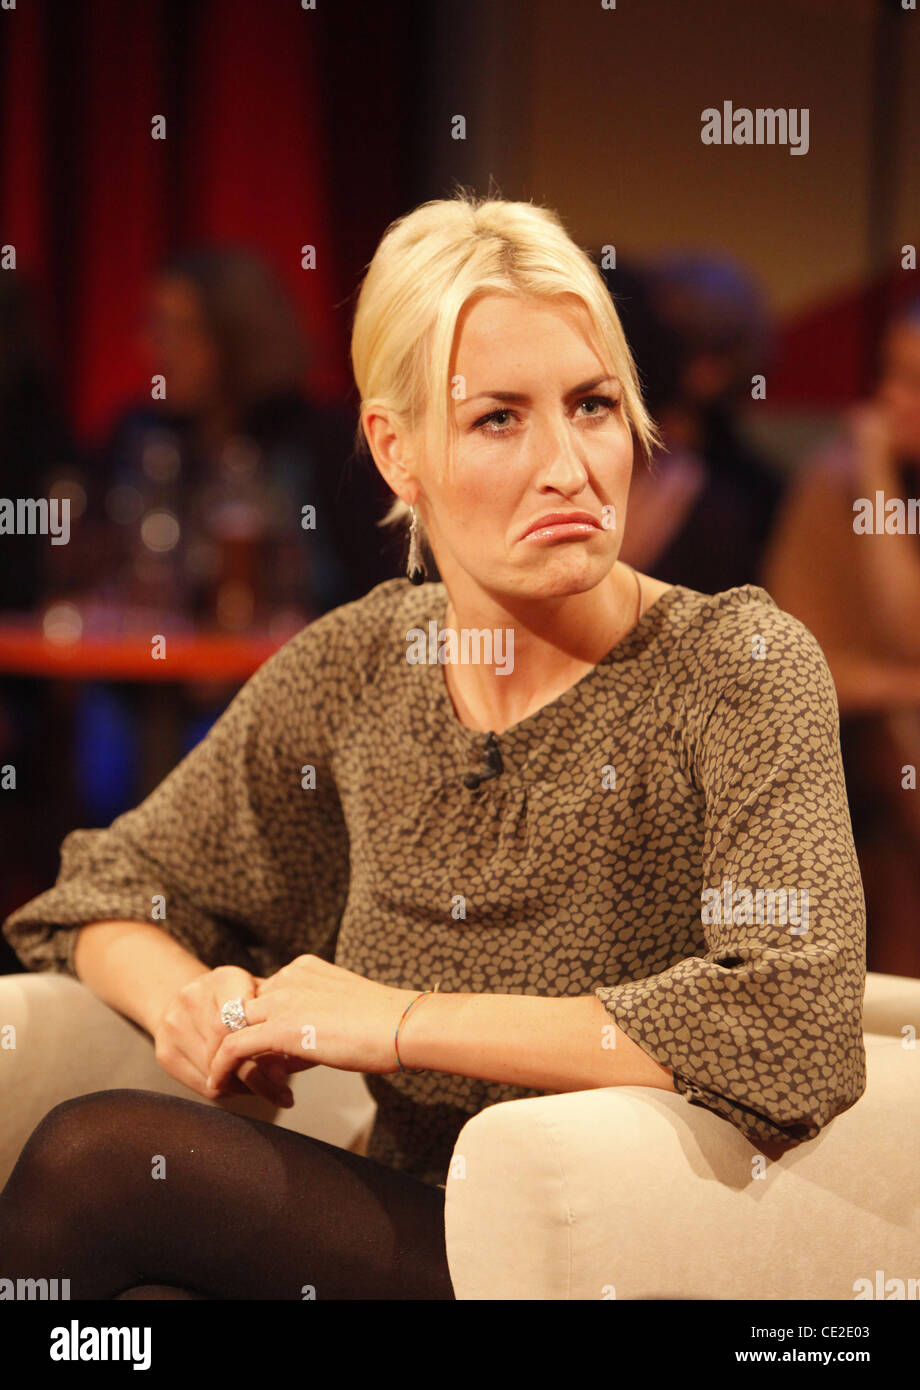 Sarah Connor making a funny face on German talkshow '3 nach 9'. Bremen, Germany - 29.10.2010 Stock Photo